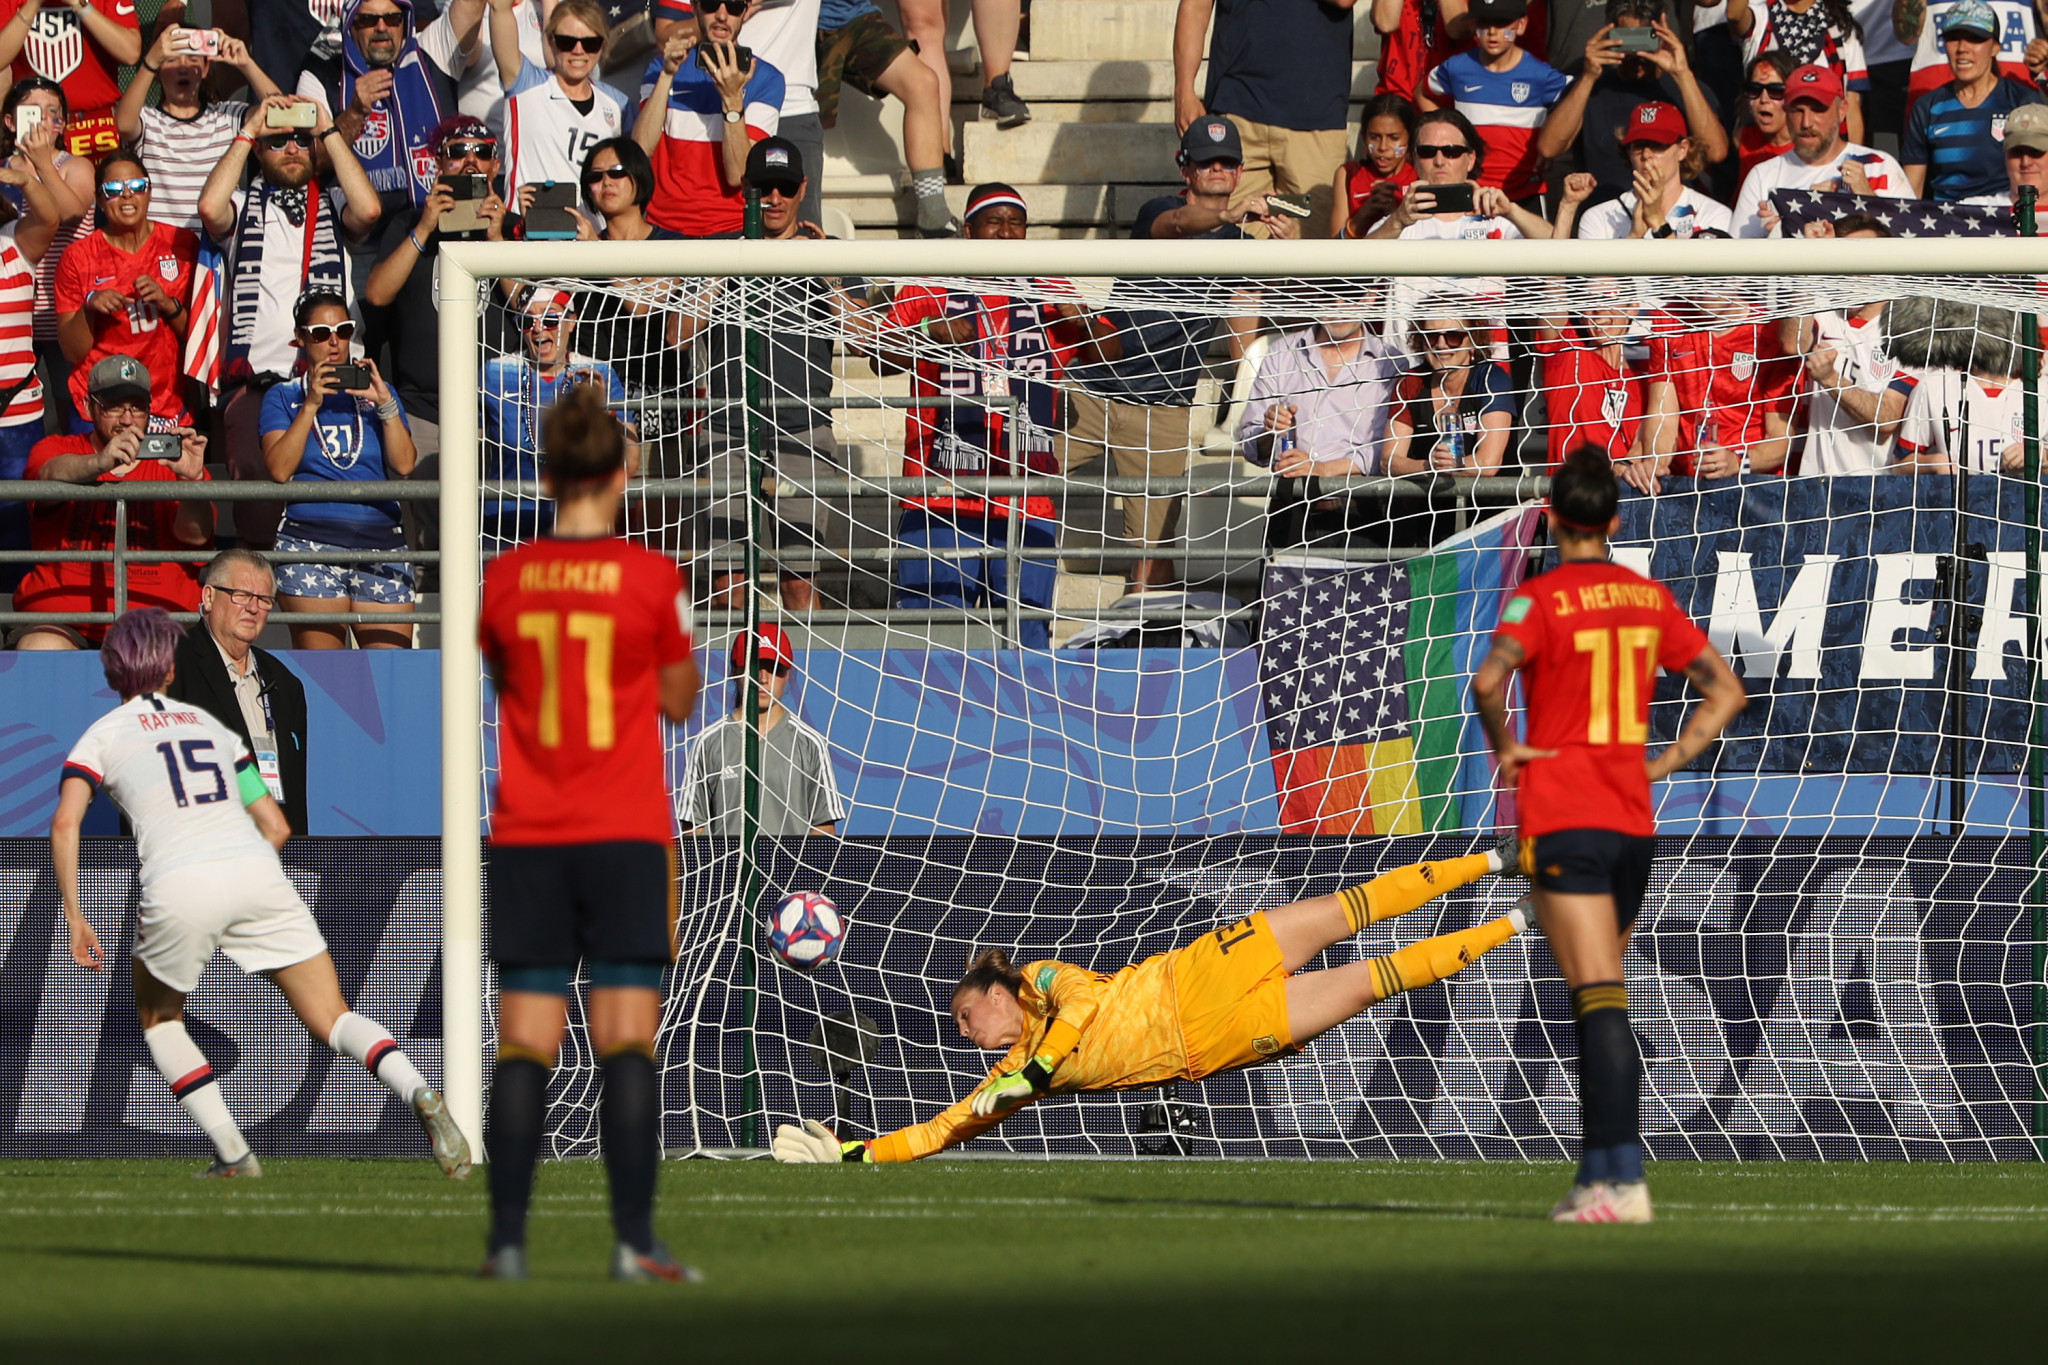 Rapinoe held her nerve to convert from the spot for a second time in the 76th minute ©Getty Images